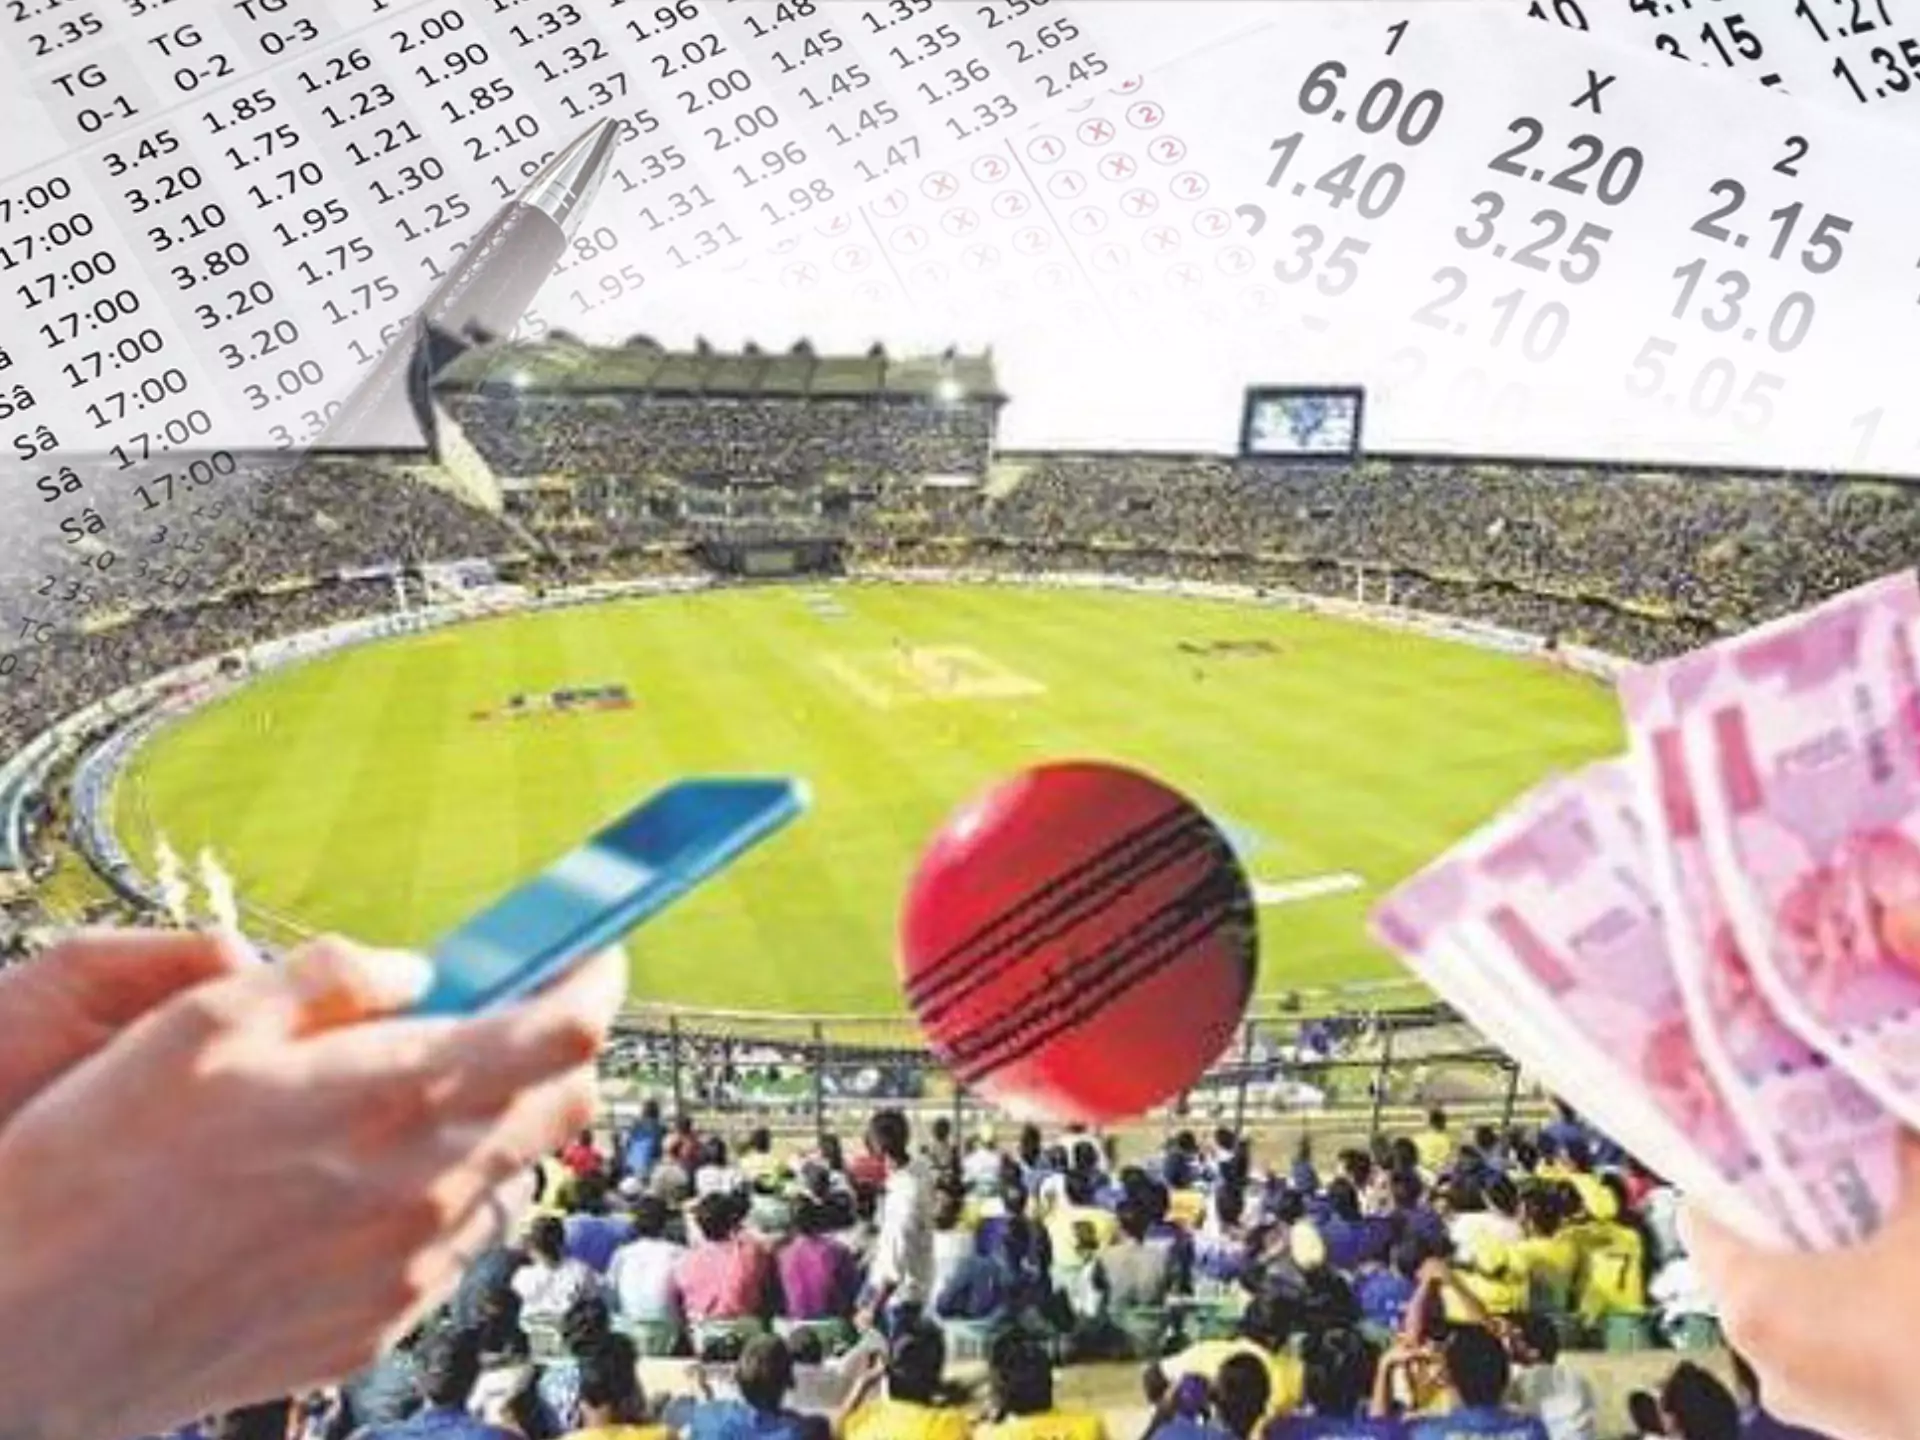 Bet on cricket only amount of money that you are ready to lose.